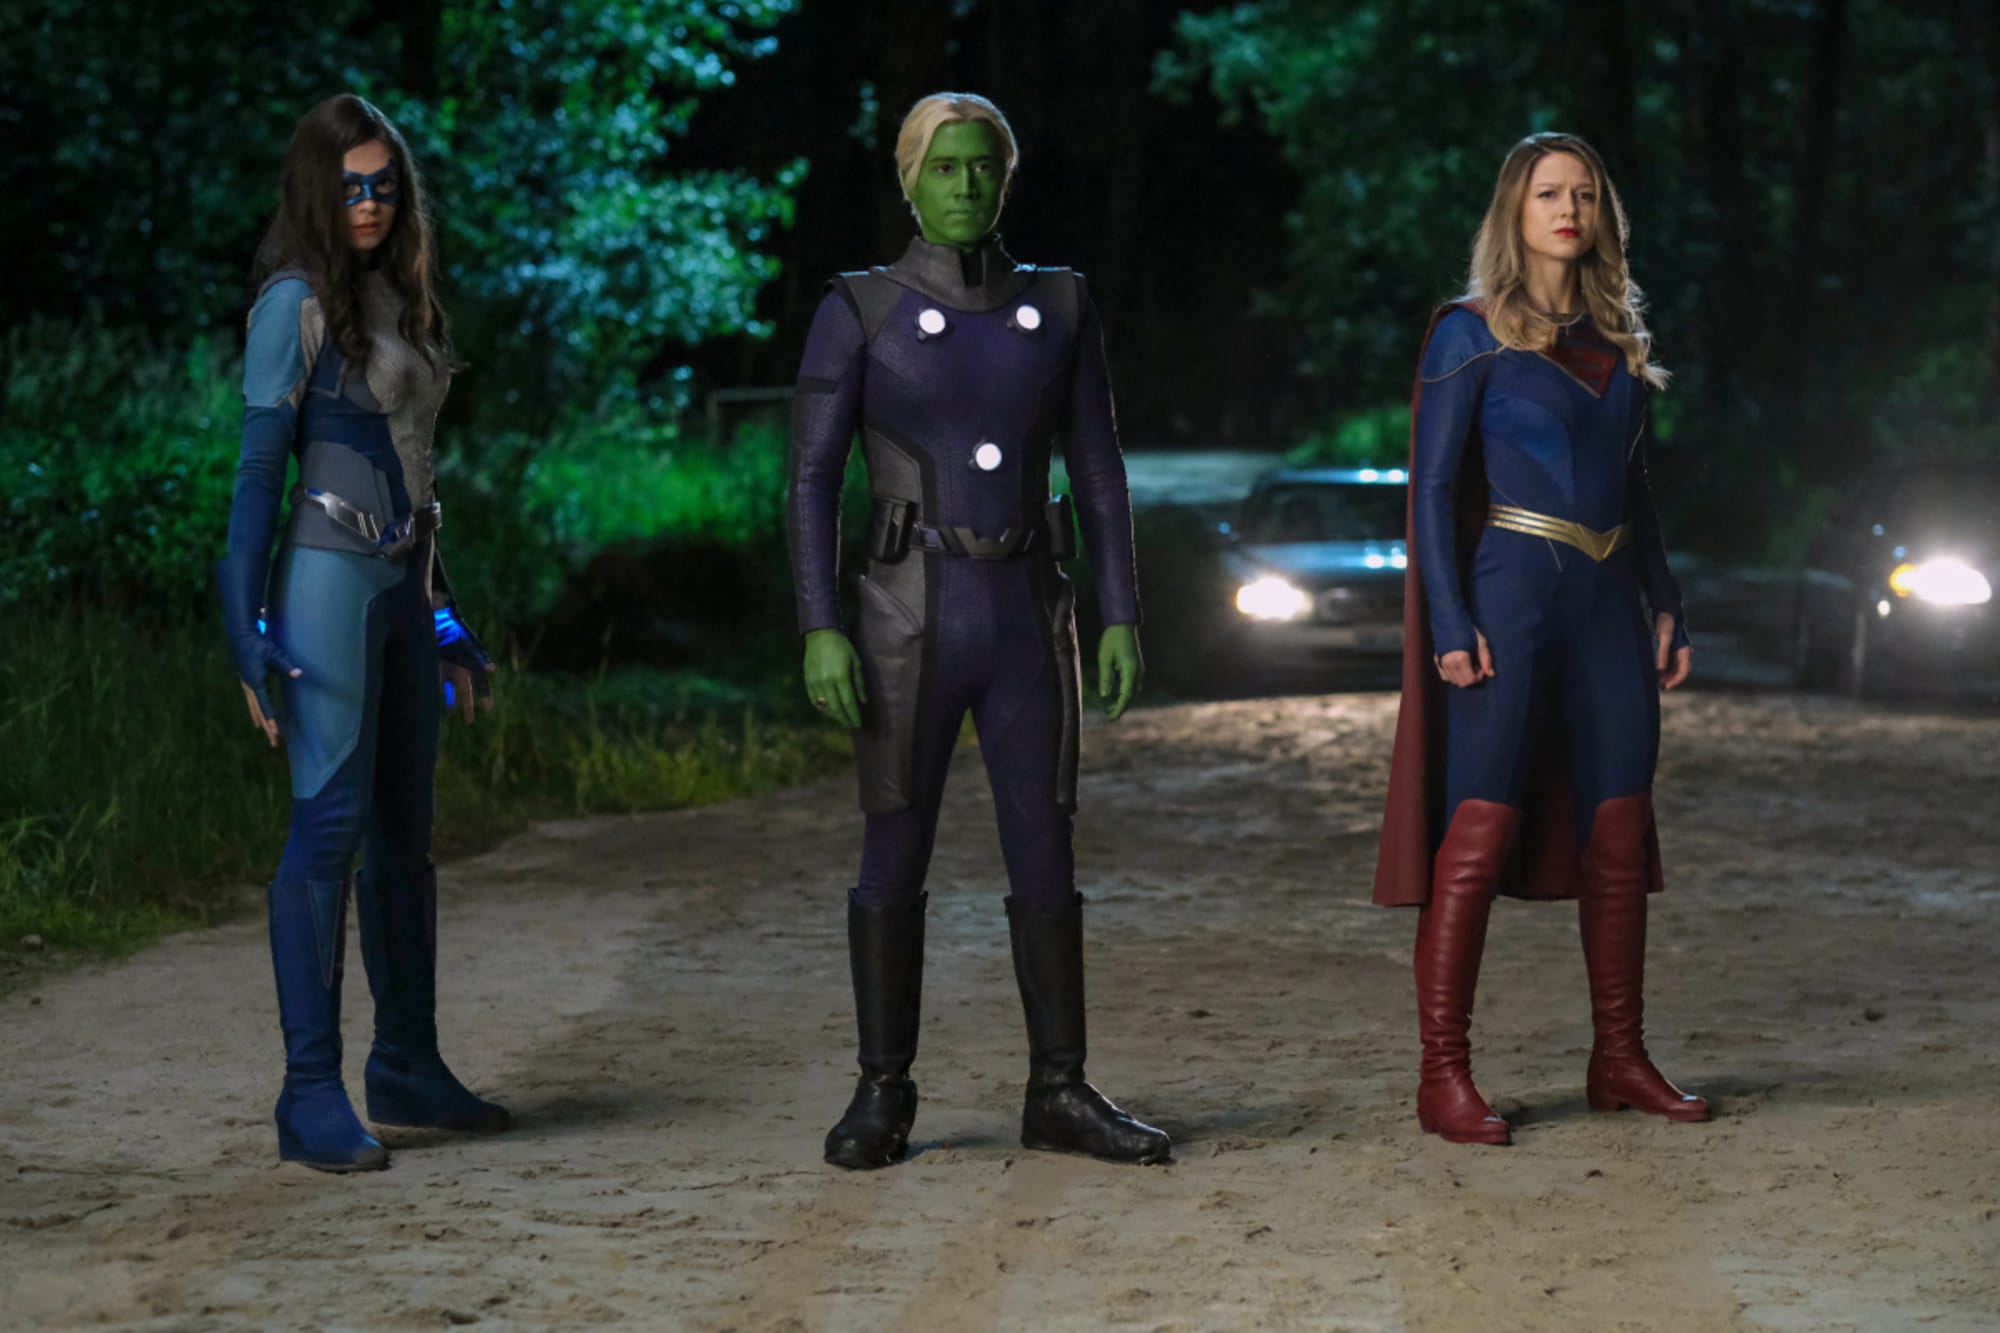 Supergirl Season 6 is the last season of the series that has been running since 2015. The show found its inspiration from the character of Supergirl or Kara Zol-El from DC Comics.